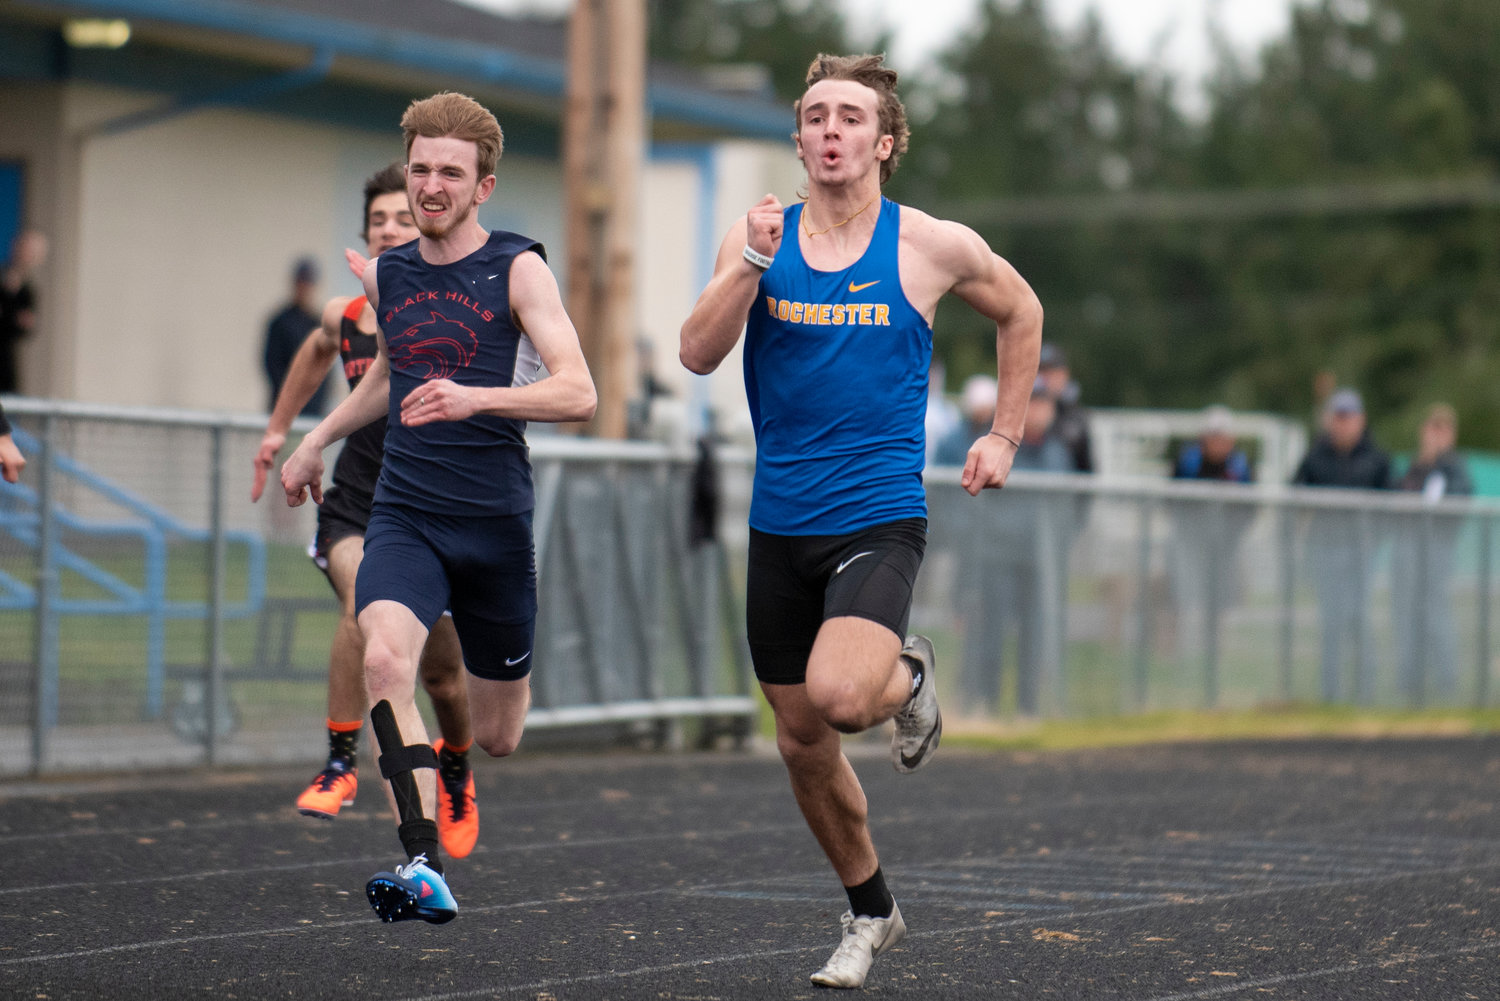 Rochester senior Talon Betts sprints in the boys 100-meter dash during the Warriors' season-opening meet at home against Black Hills and Centralia on Thursday, March 17.